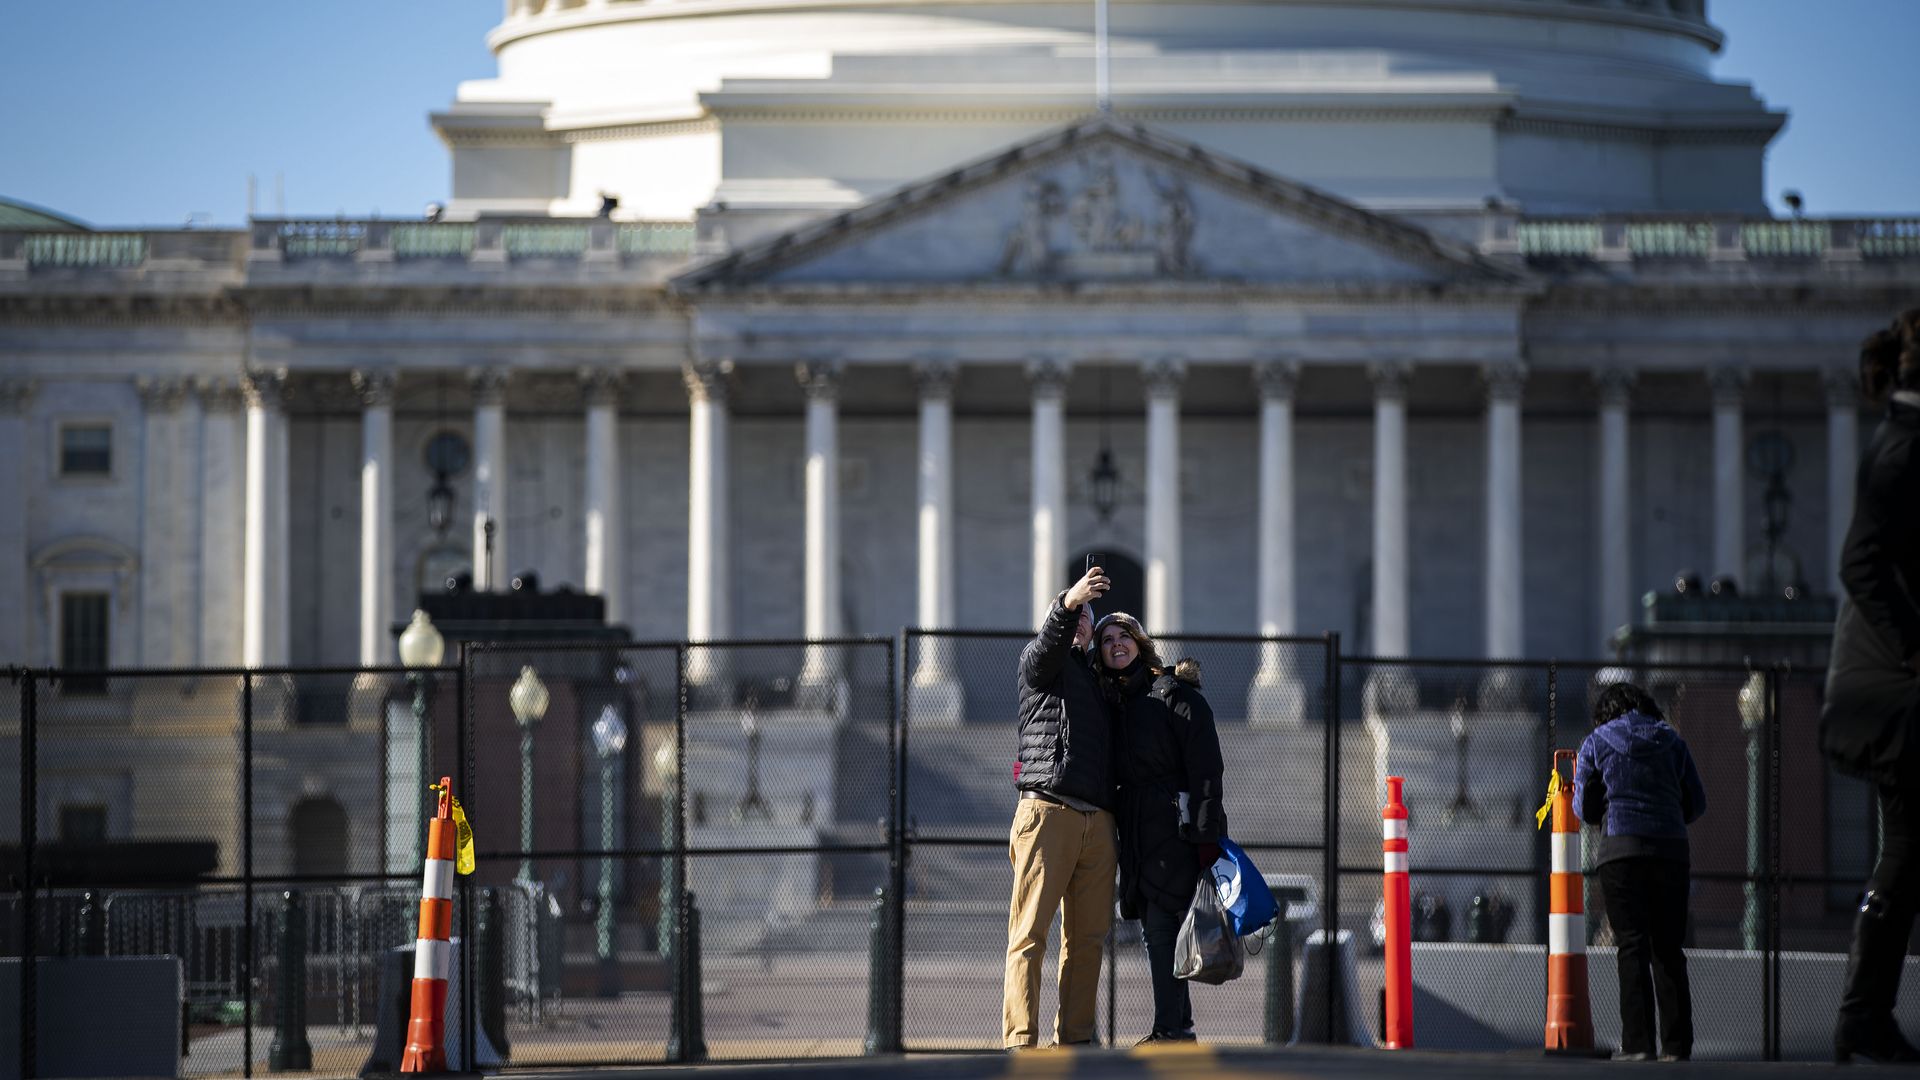 A couple is seen taking a selfie in front of a barricaded U.S. Capitol.